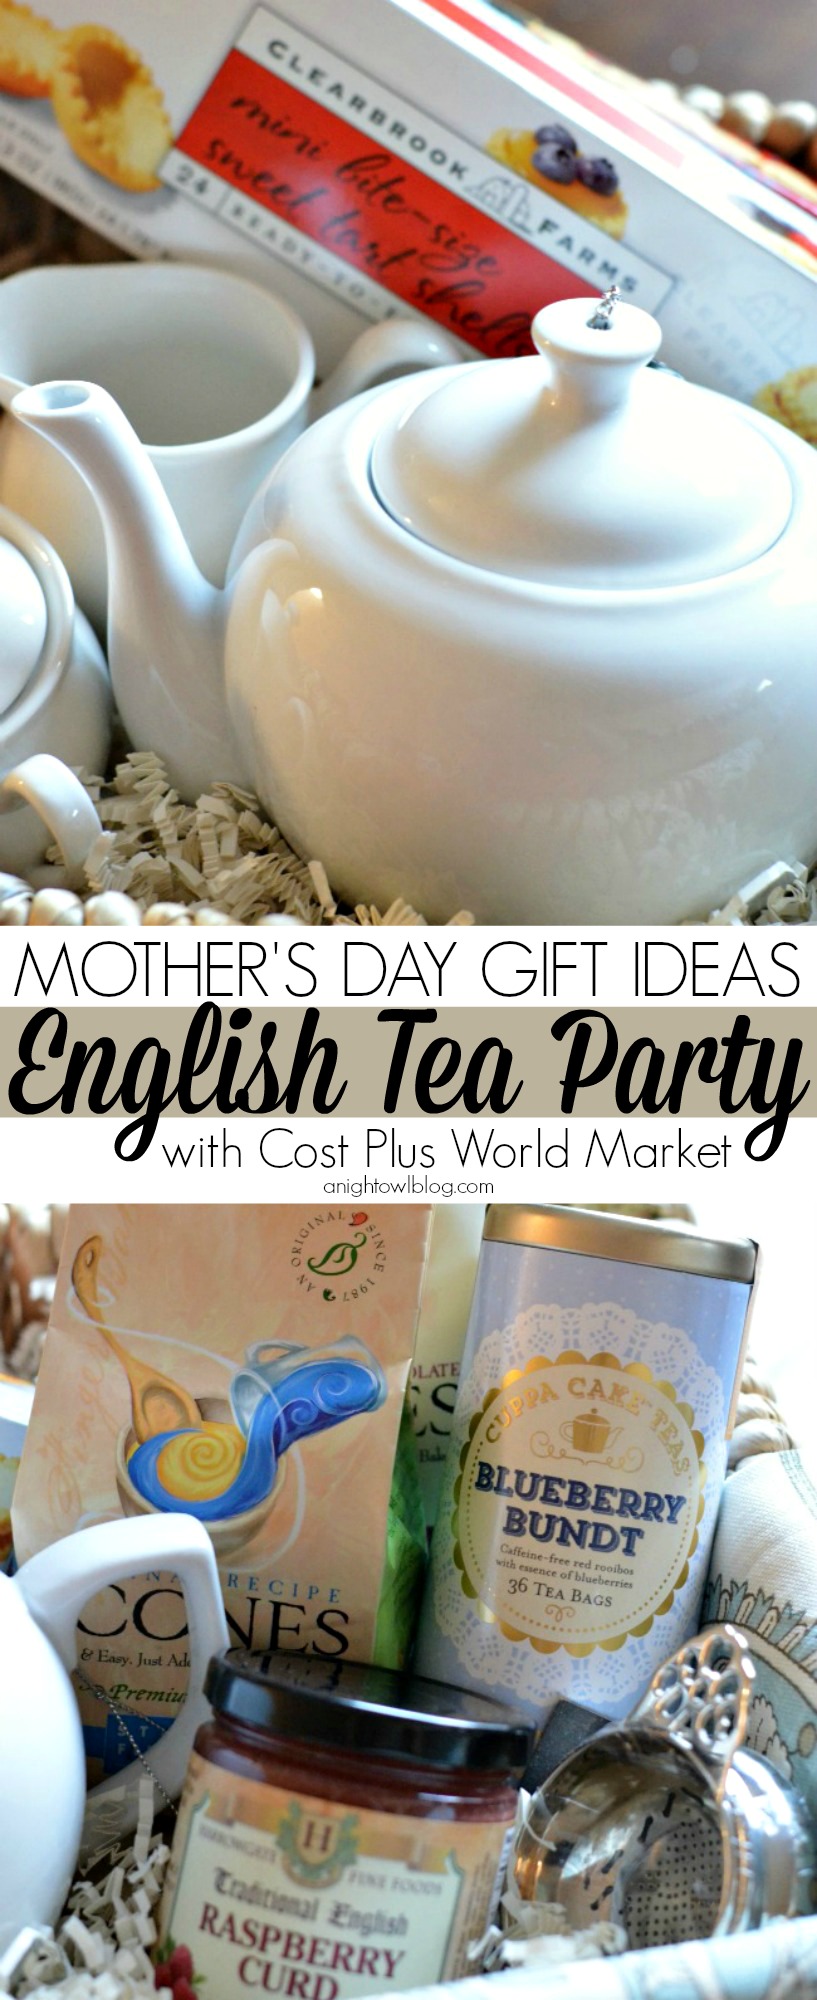 Mother's Day Gift Ideas - English Tea Party